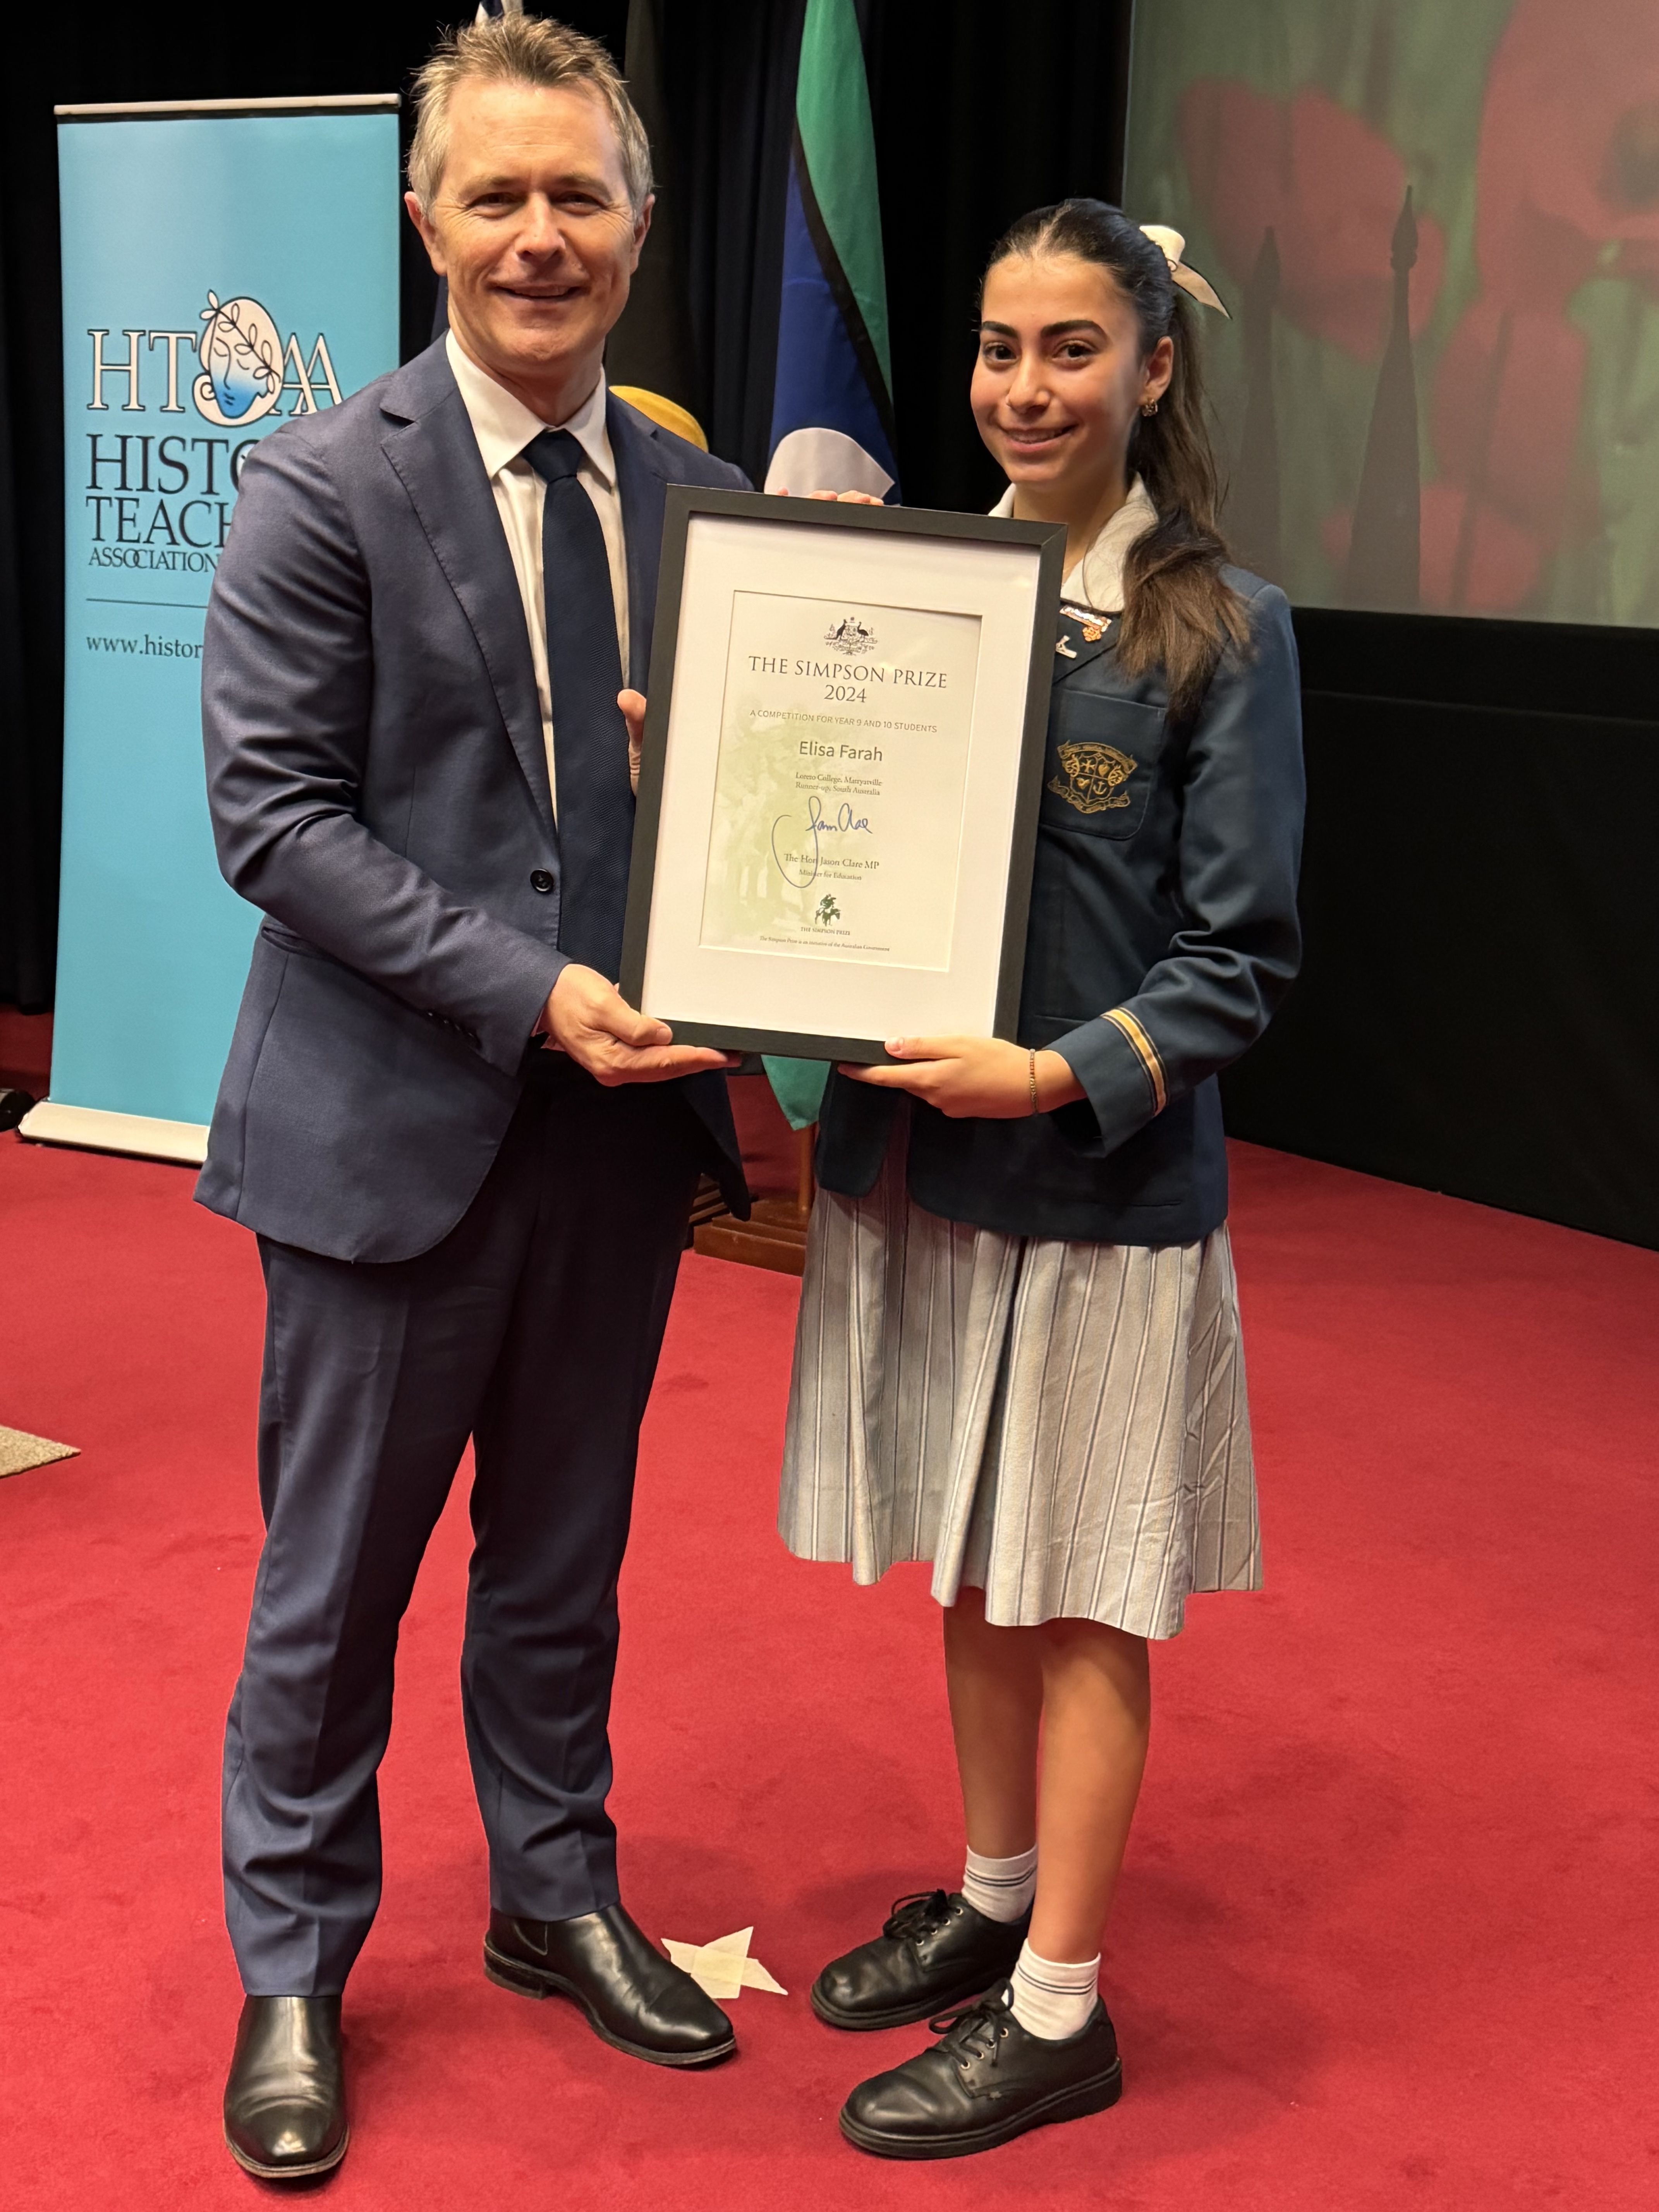 The Hon. Jason Clare MP presenting Elisa Farah with the 2024 Simpson Prize Runner-Up Award